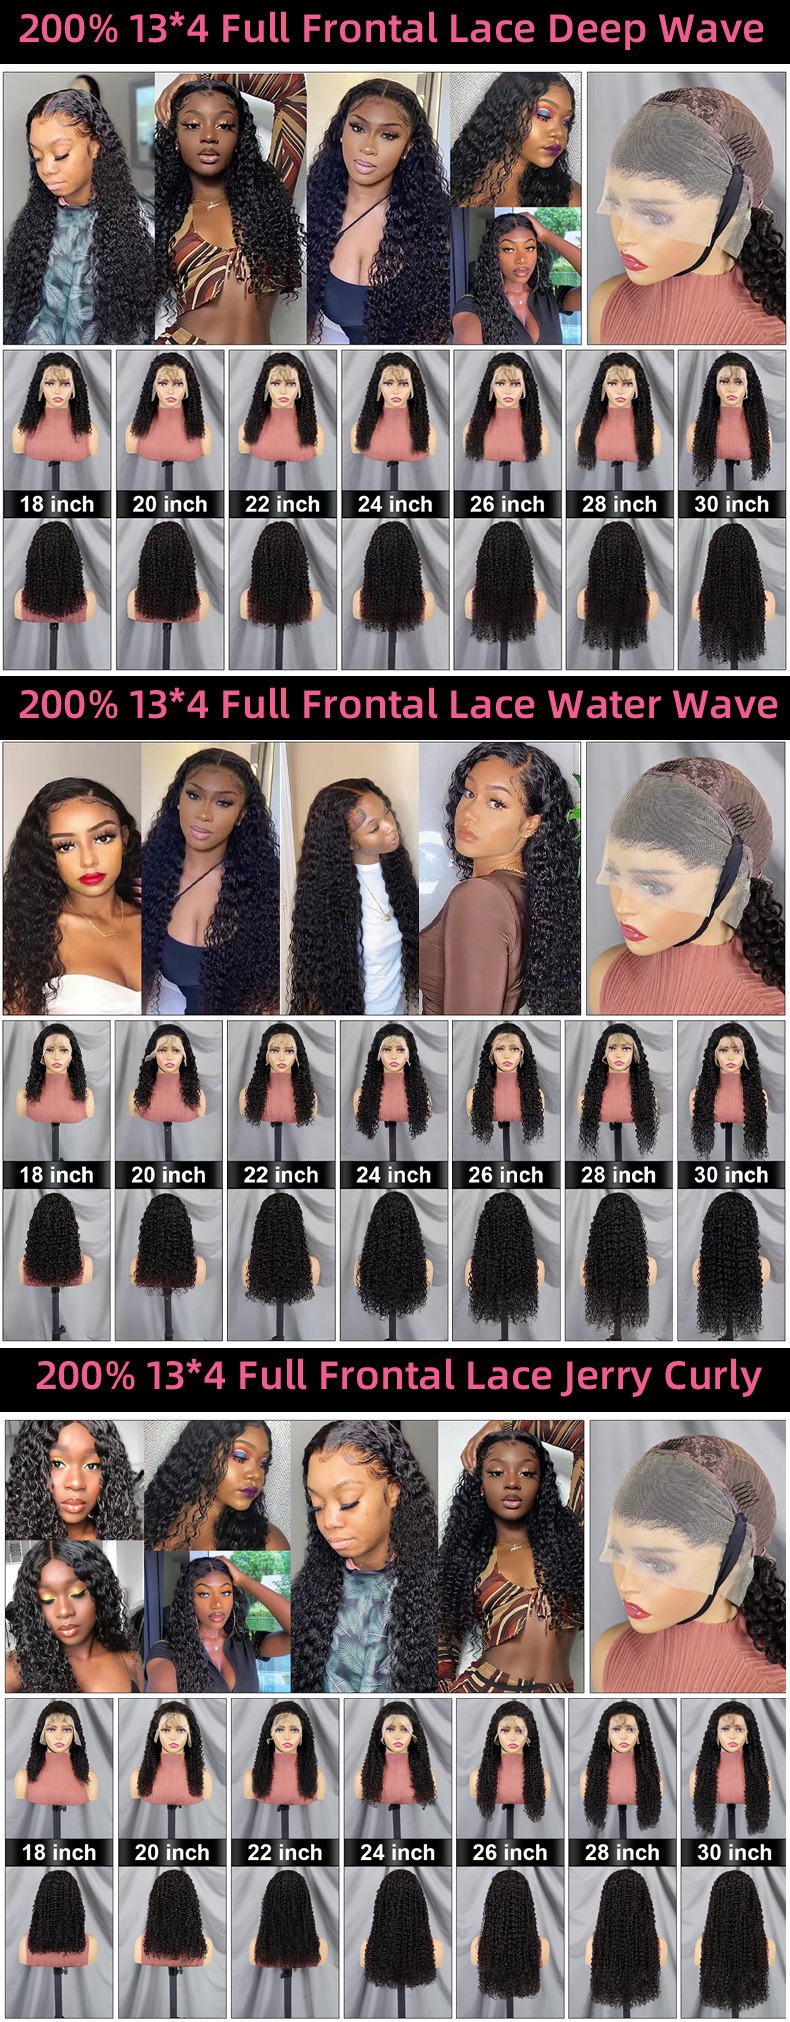 Embark on a journey of premium beauty with our meticulously crafted long hair front lace wig, created from authentic human hair in an elegant 13x4 lace style